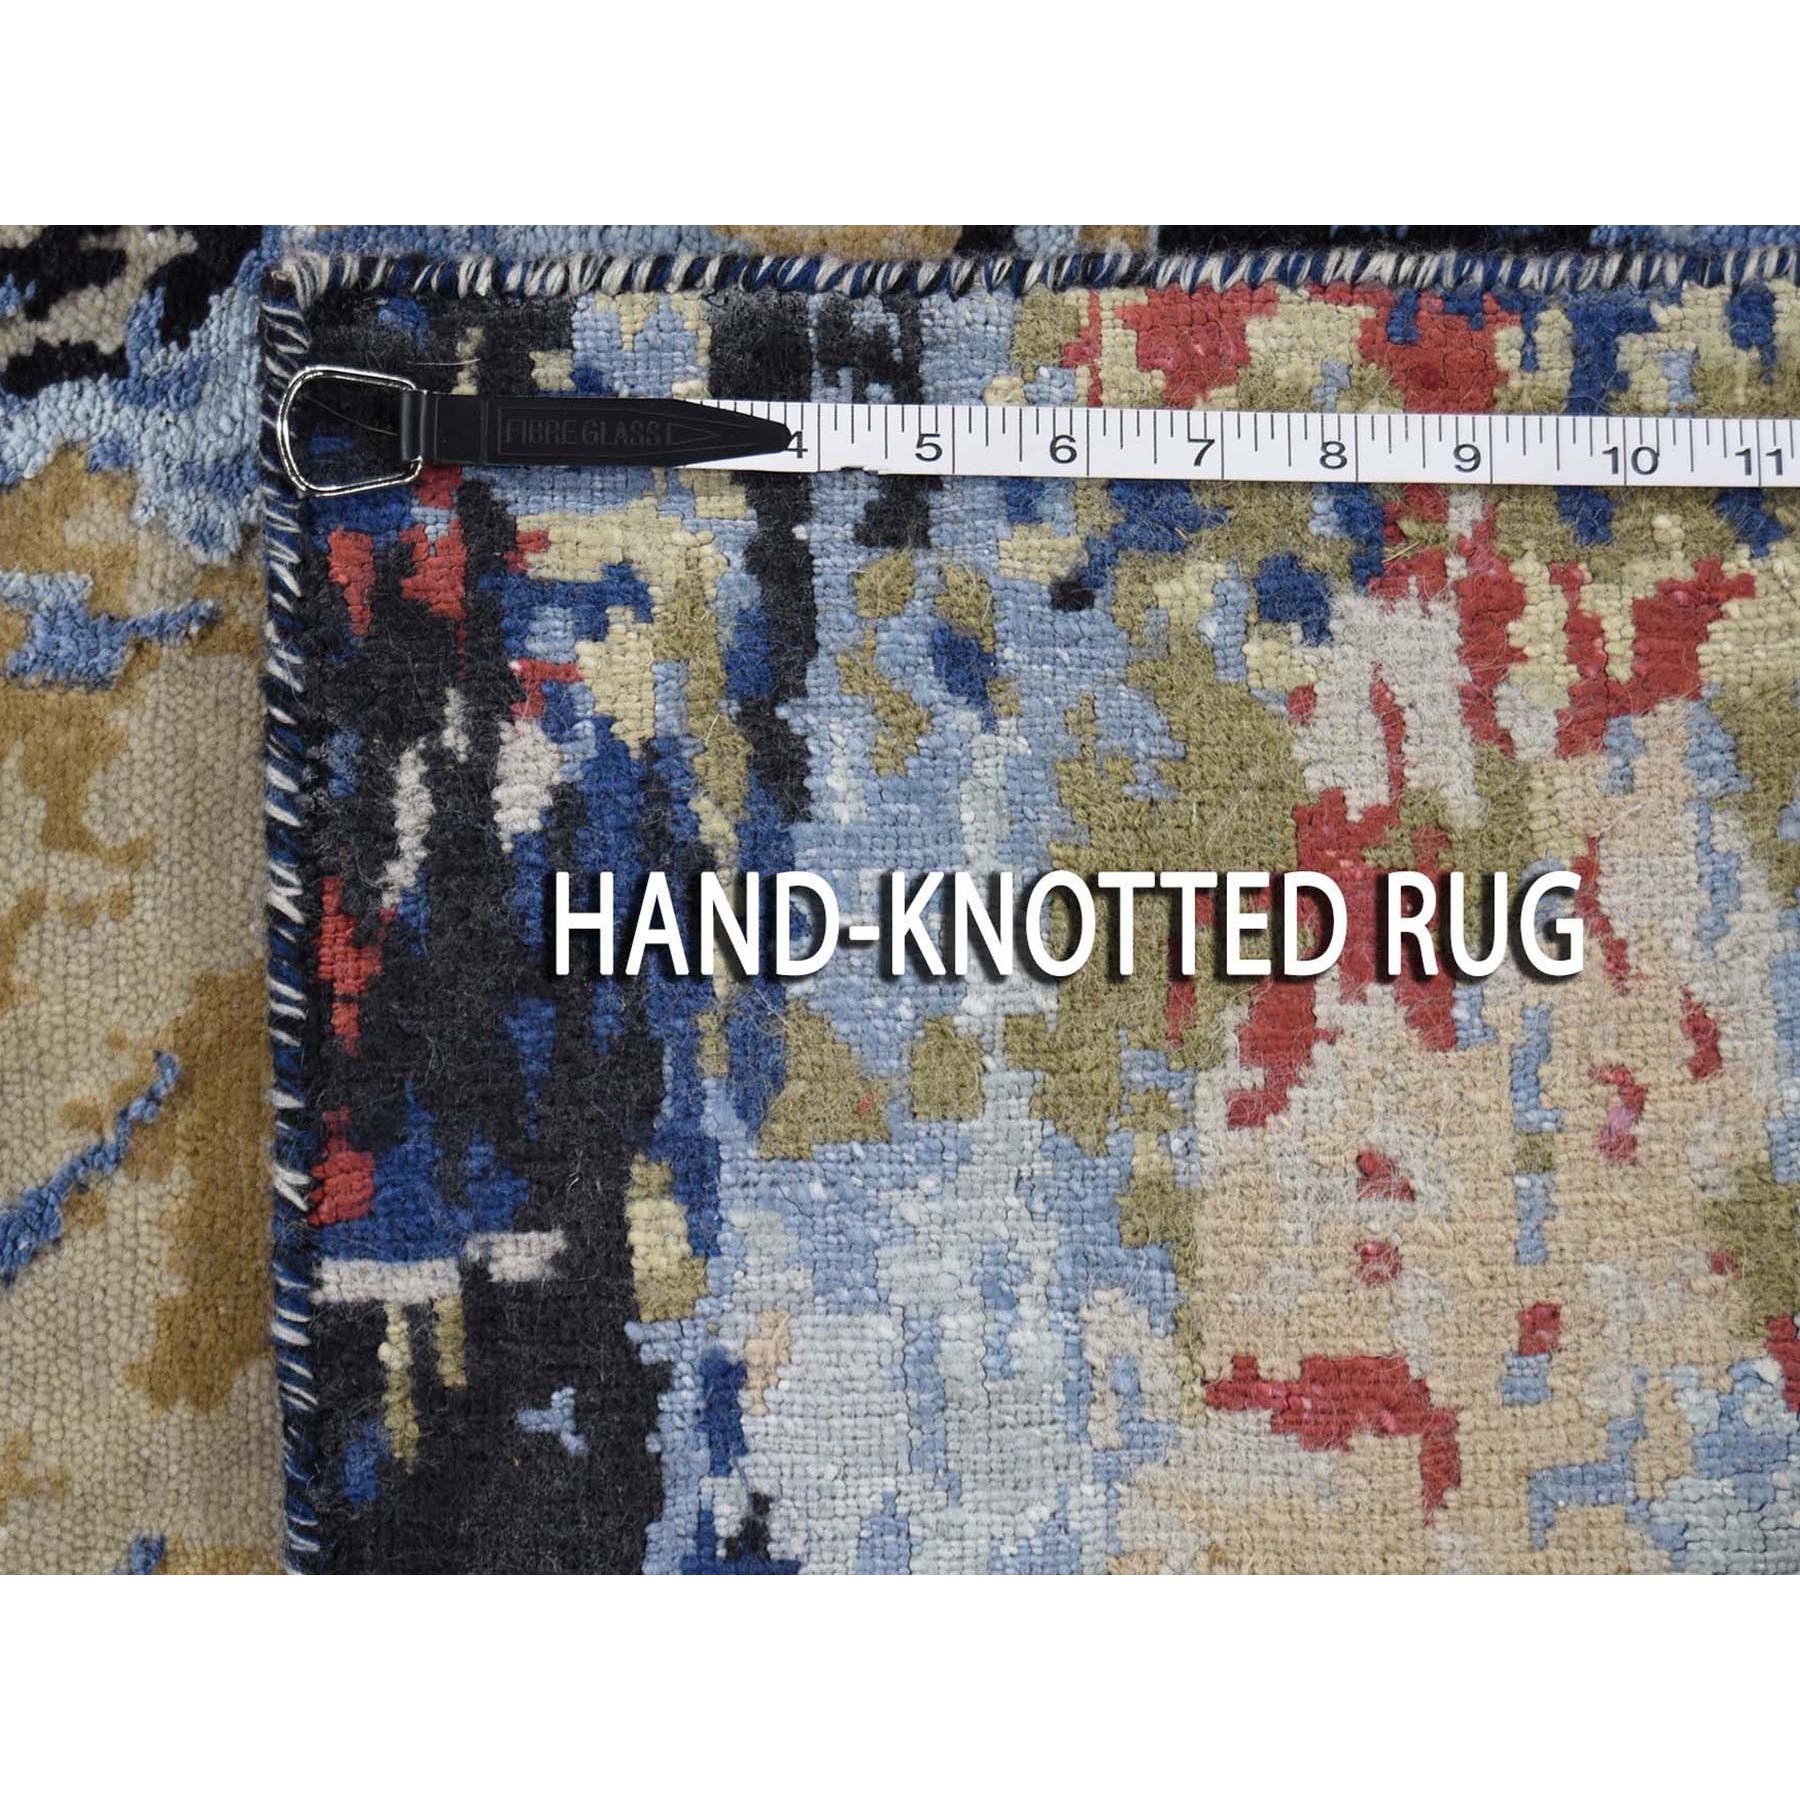 1'10"x3' Sampler Hi-Low Pile Abstract Design Wool And Silk Hand Woven Oriental Rug 